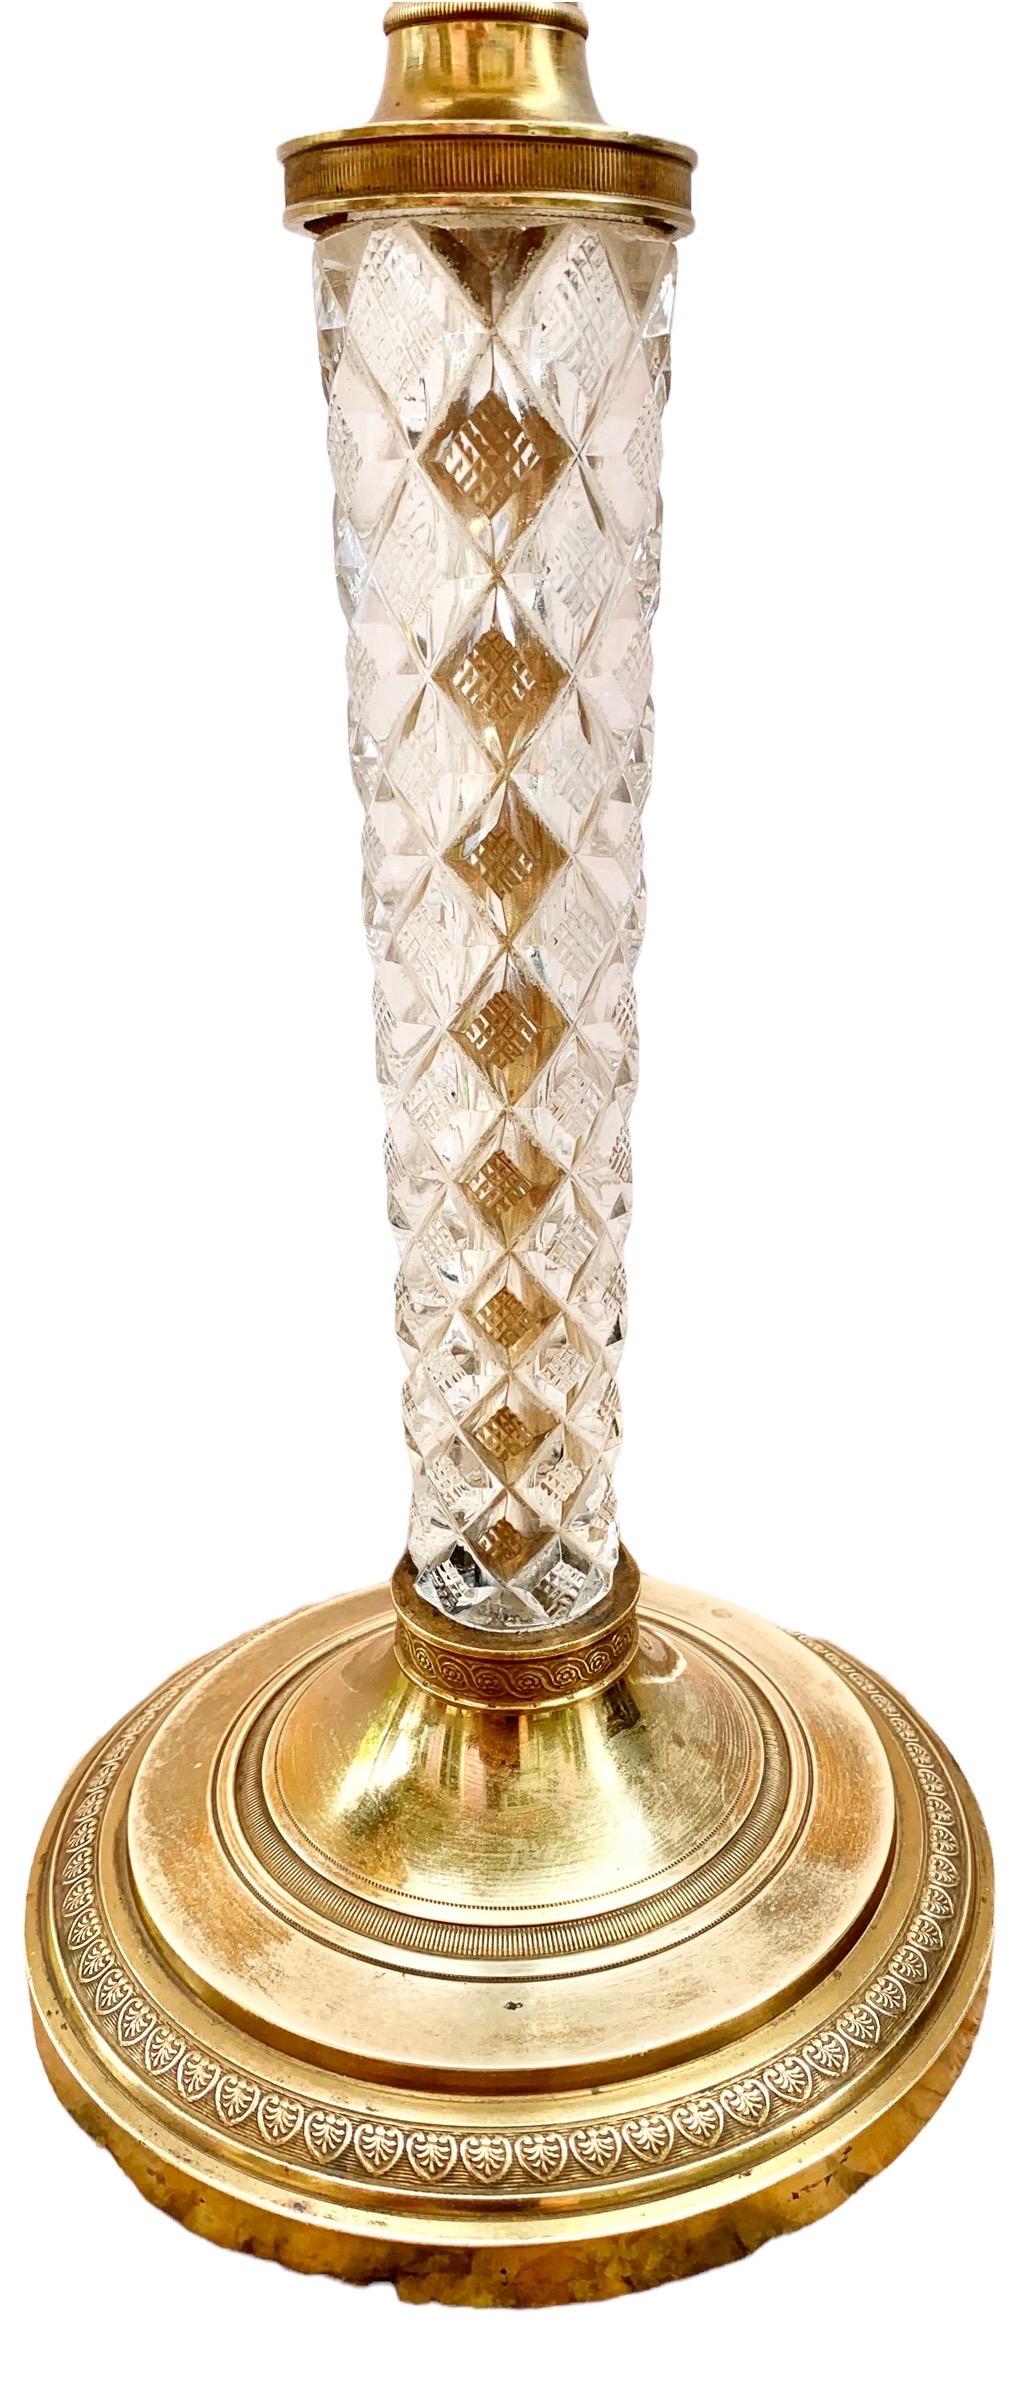 20th Century Antique French Gilt Bronze and Cut Crystal Candlestick Lamp